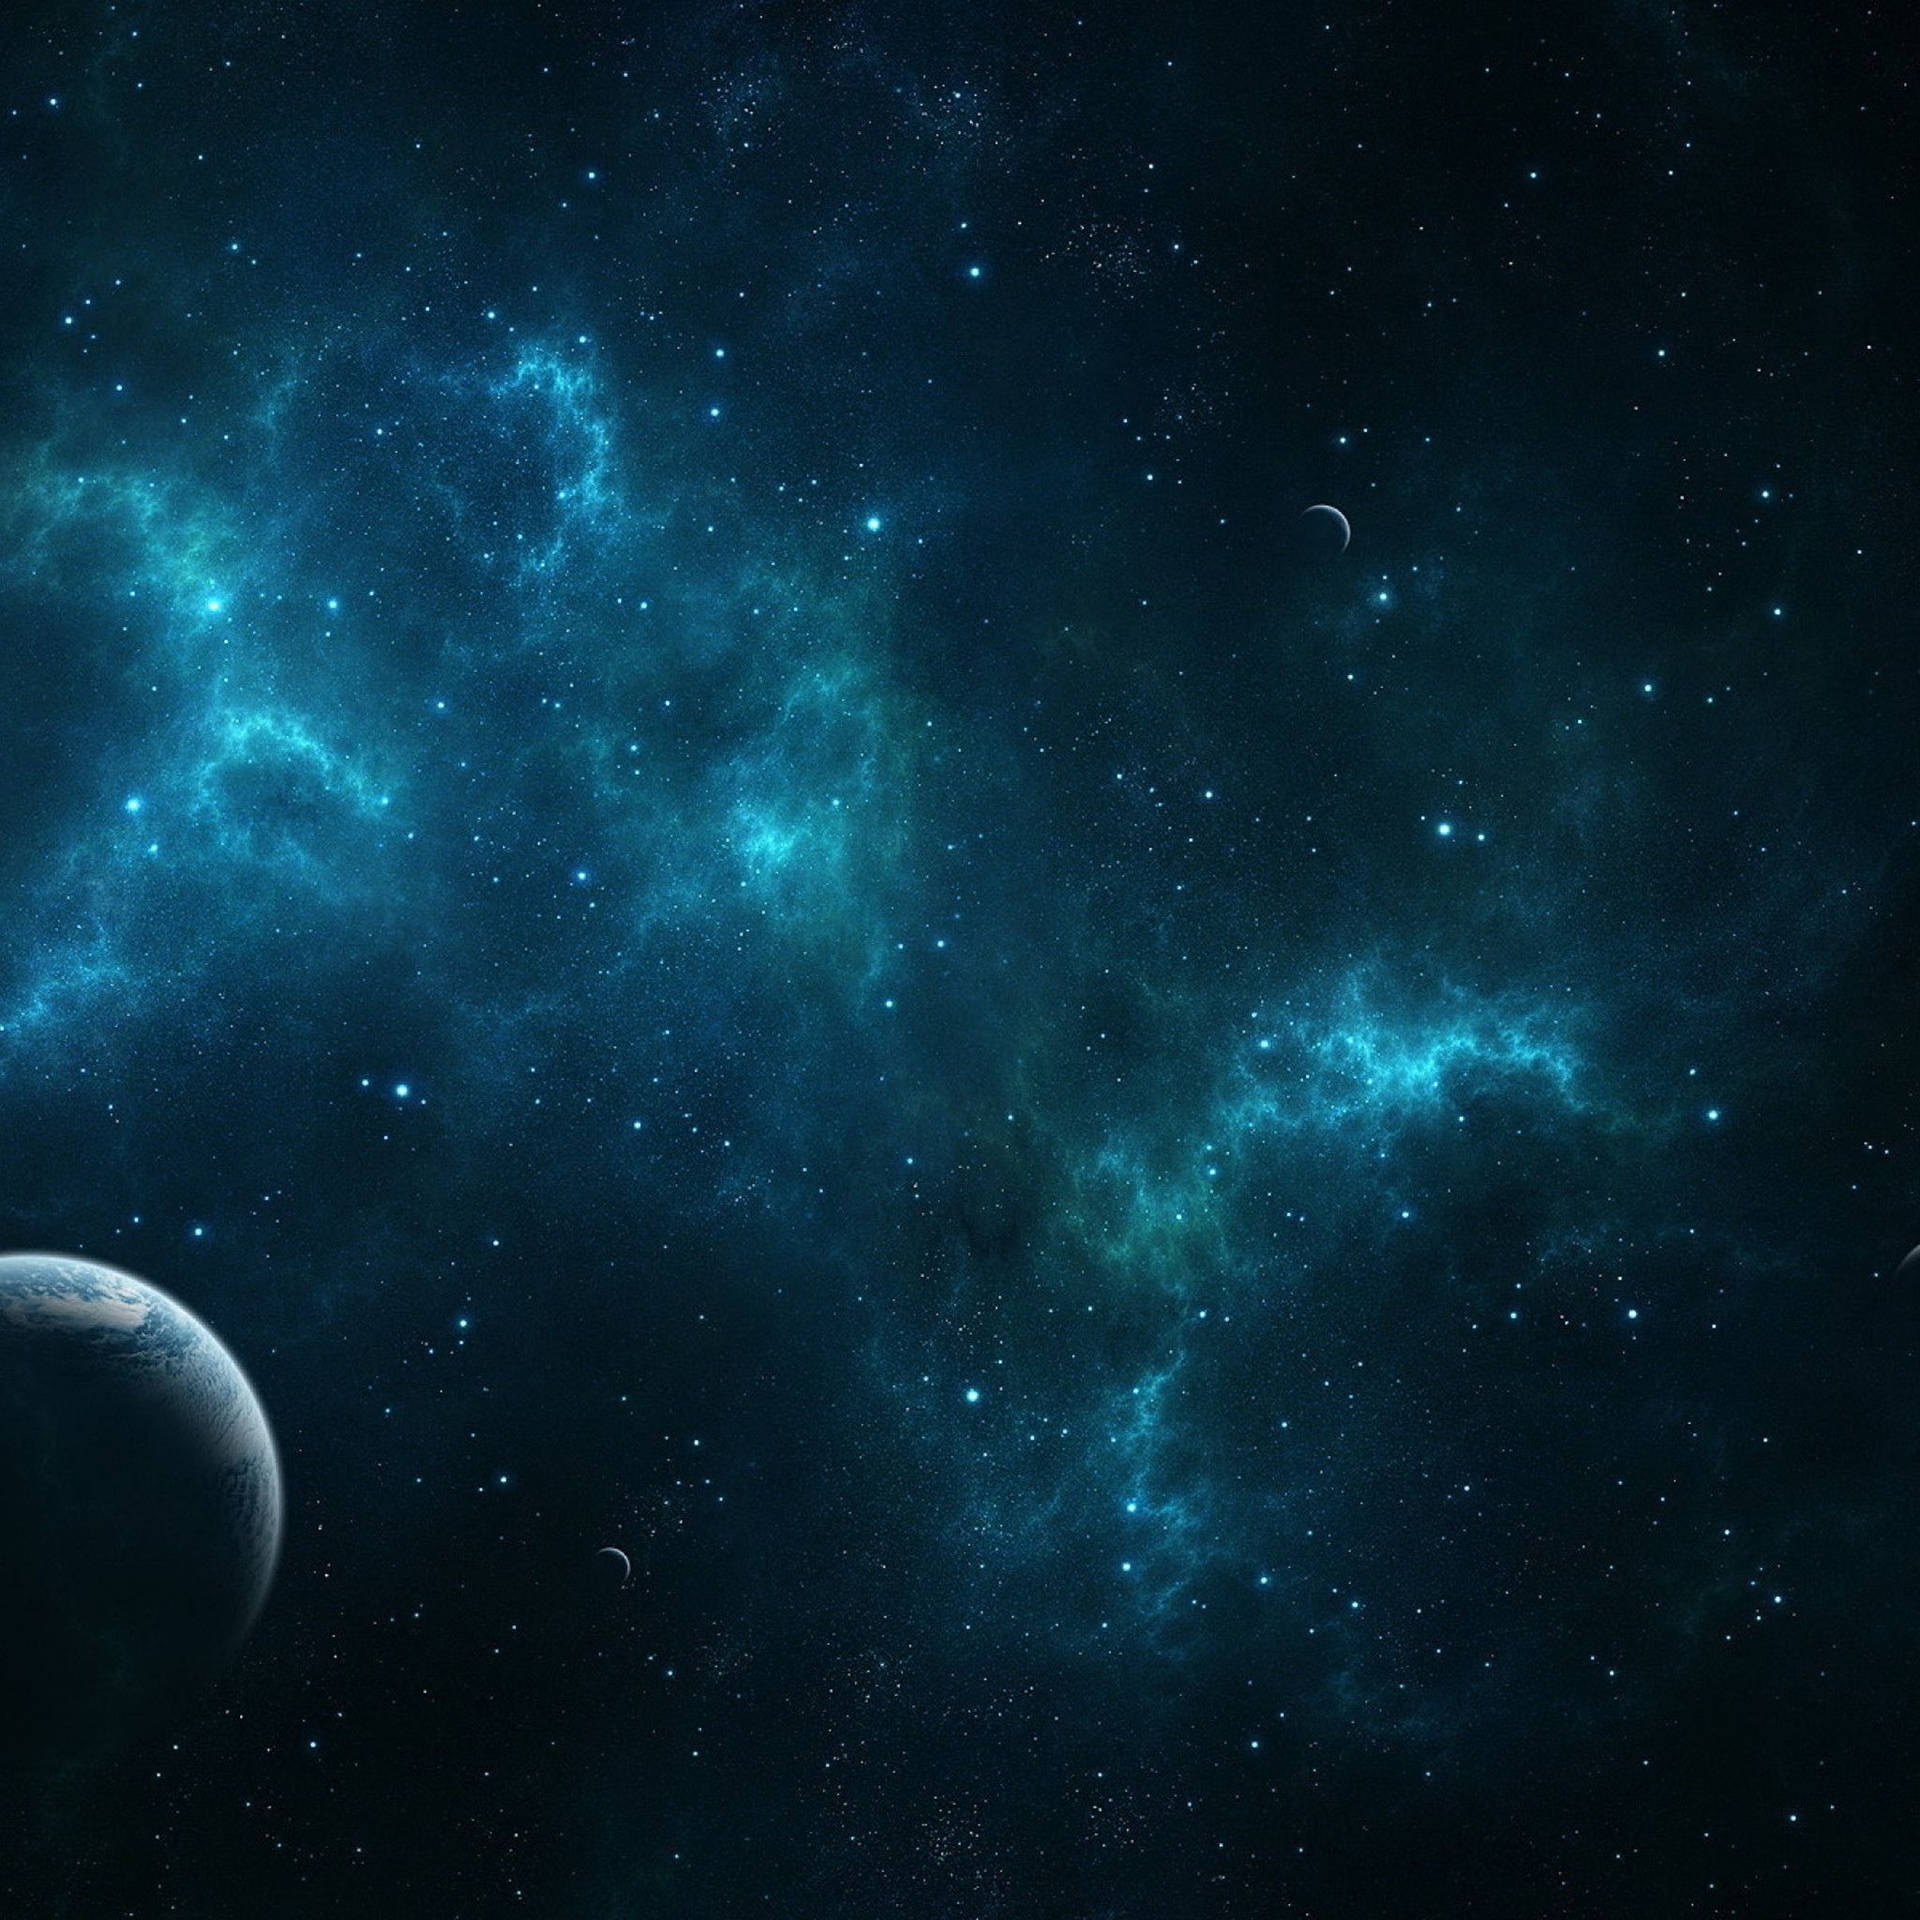 Outer Space On Free iPad Wallpaper